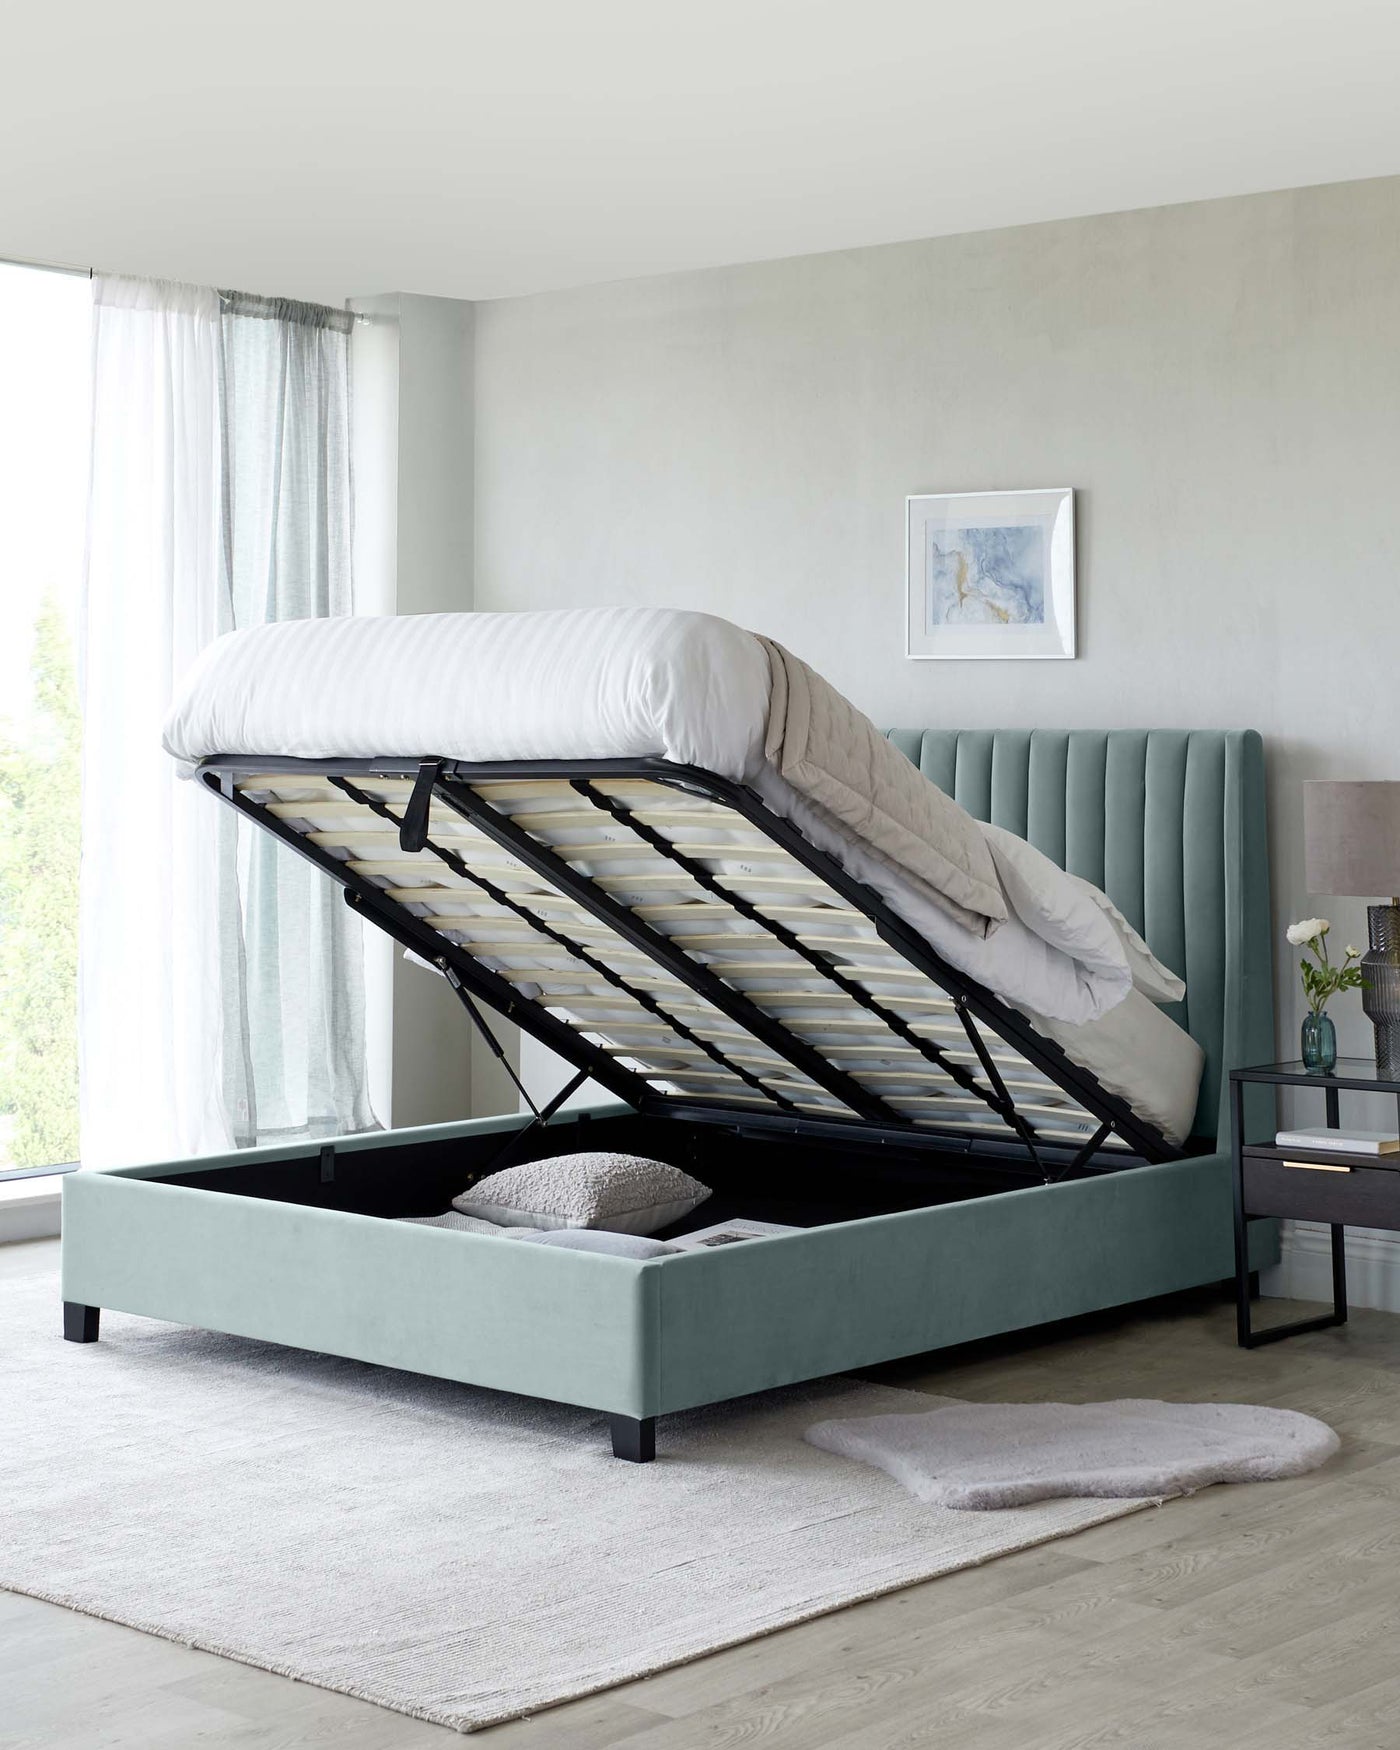 A contemporary, upholstered storage bed with the mattress lifted to reveal an ample storage space beneath. The bed features a teal fabric finish and a vertically tufted headboard, set over a light grey area rug in a well-lit room with minimalist decor.